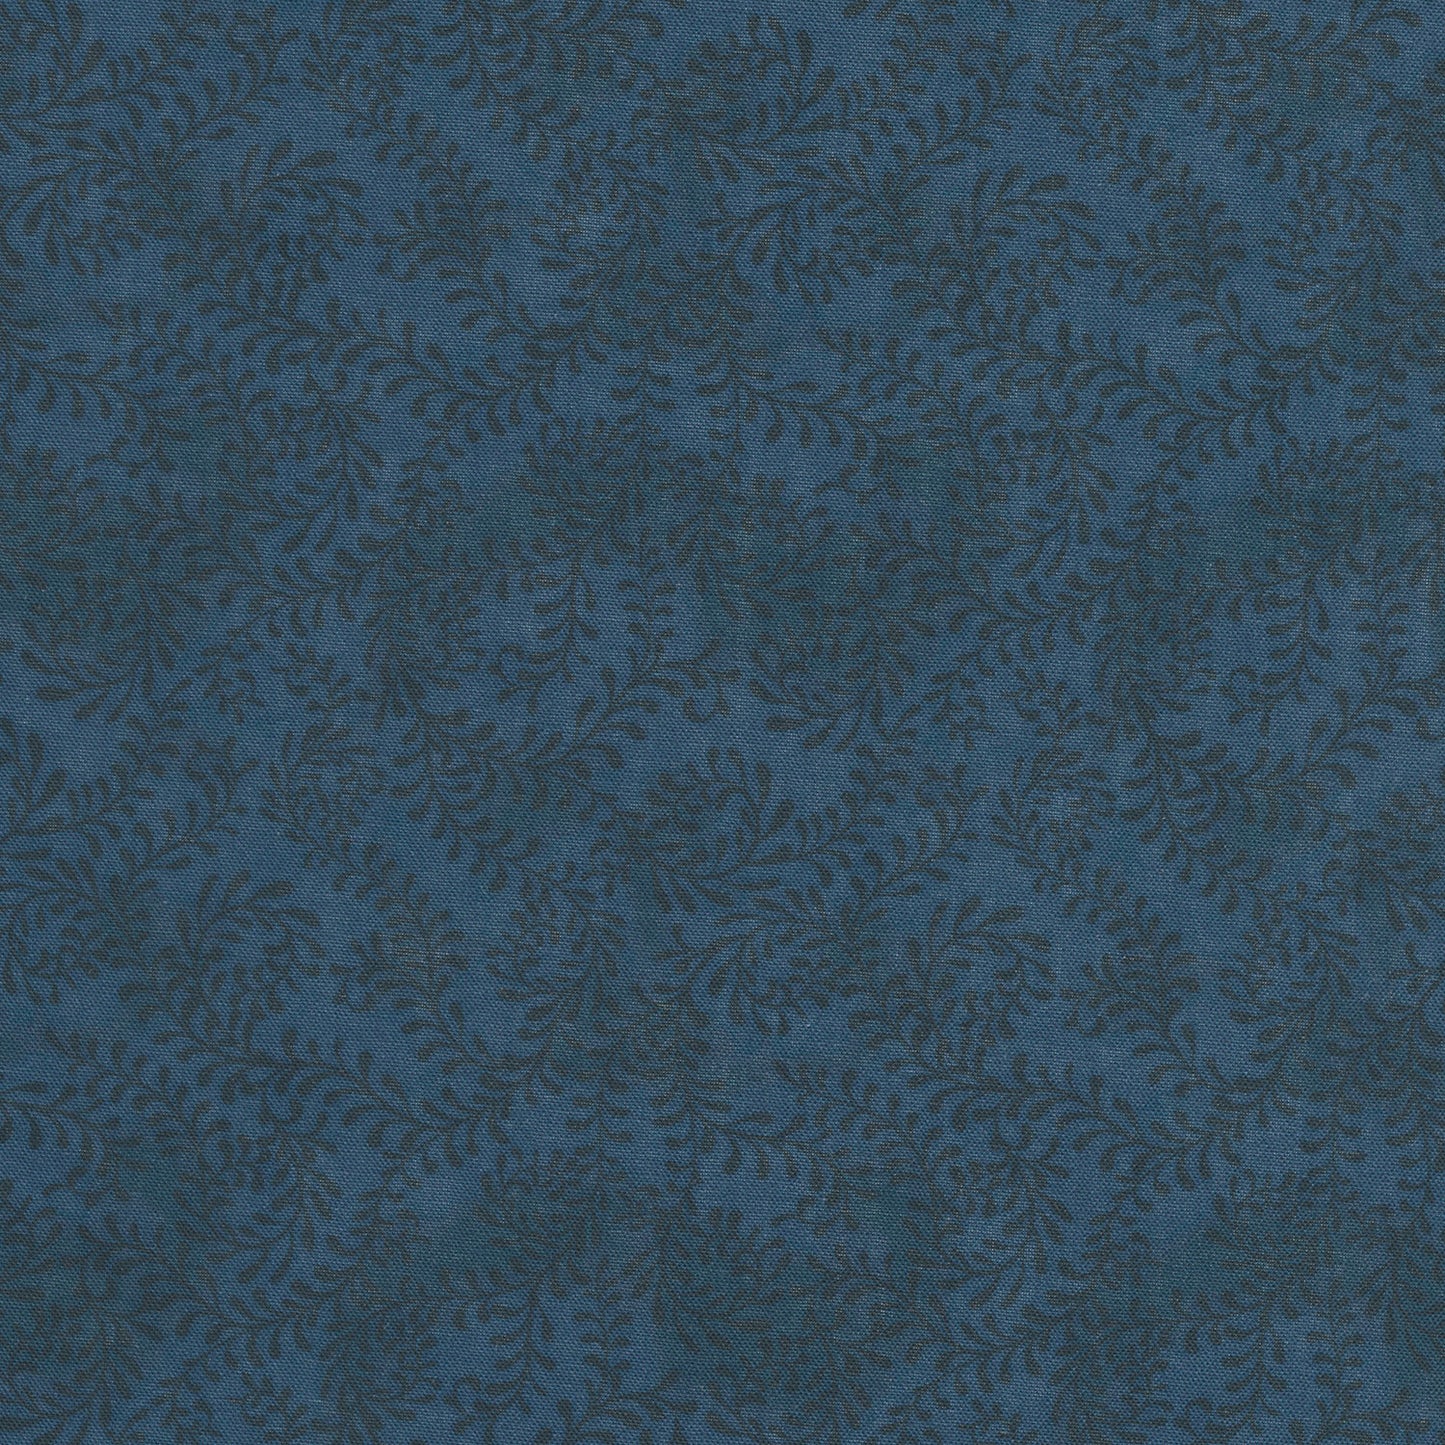 Wilmington Essentials - Swirling Leaves Navy 108" Wide Backing Yardage Primary Image